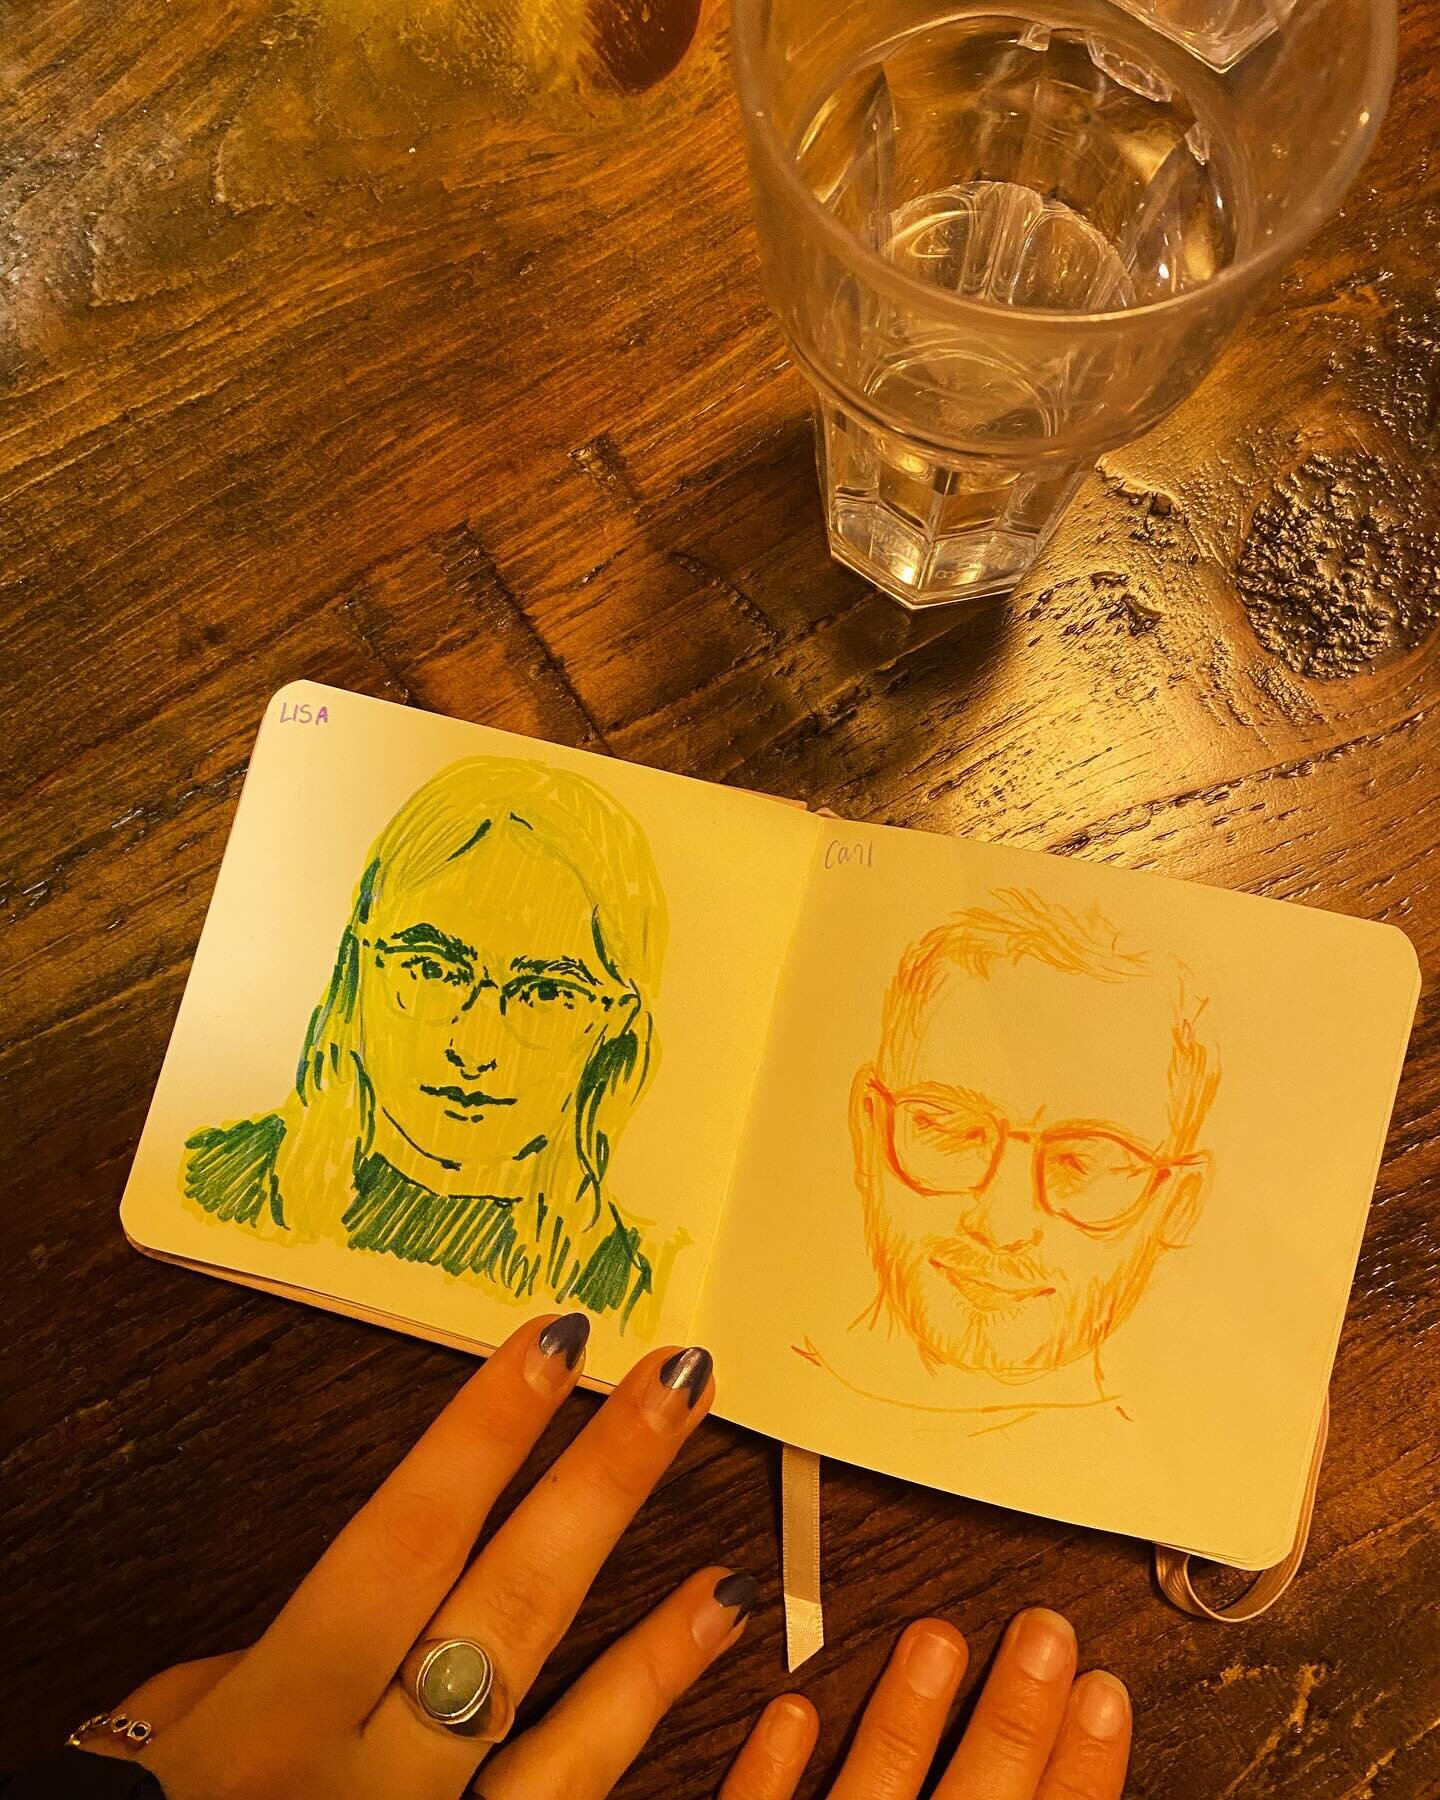 Last ones at @theyard_ely - thanks for having us 🫶

#sketchandsocial #cambridgeshire #camcreatives #camcreates #ely #portrait